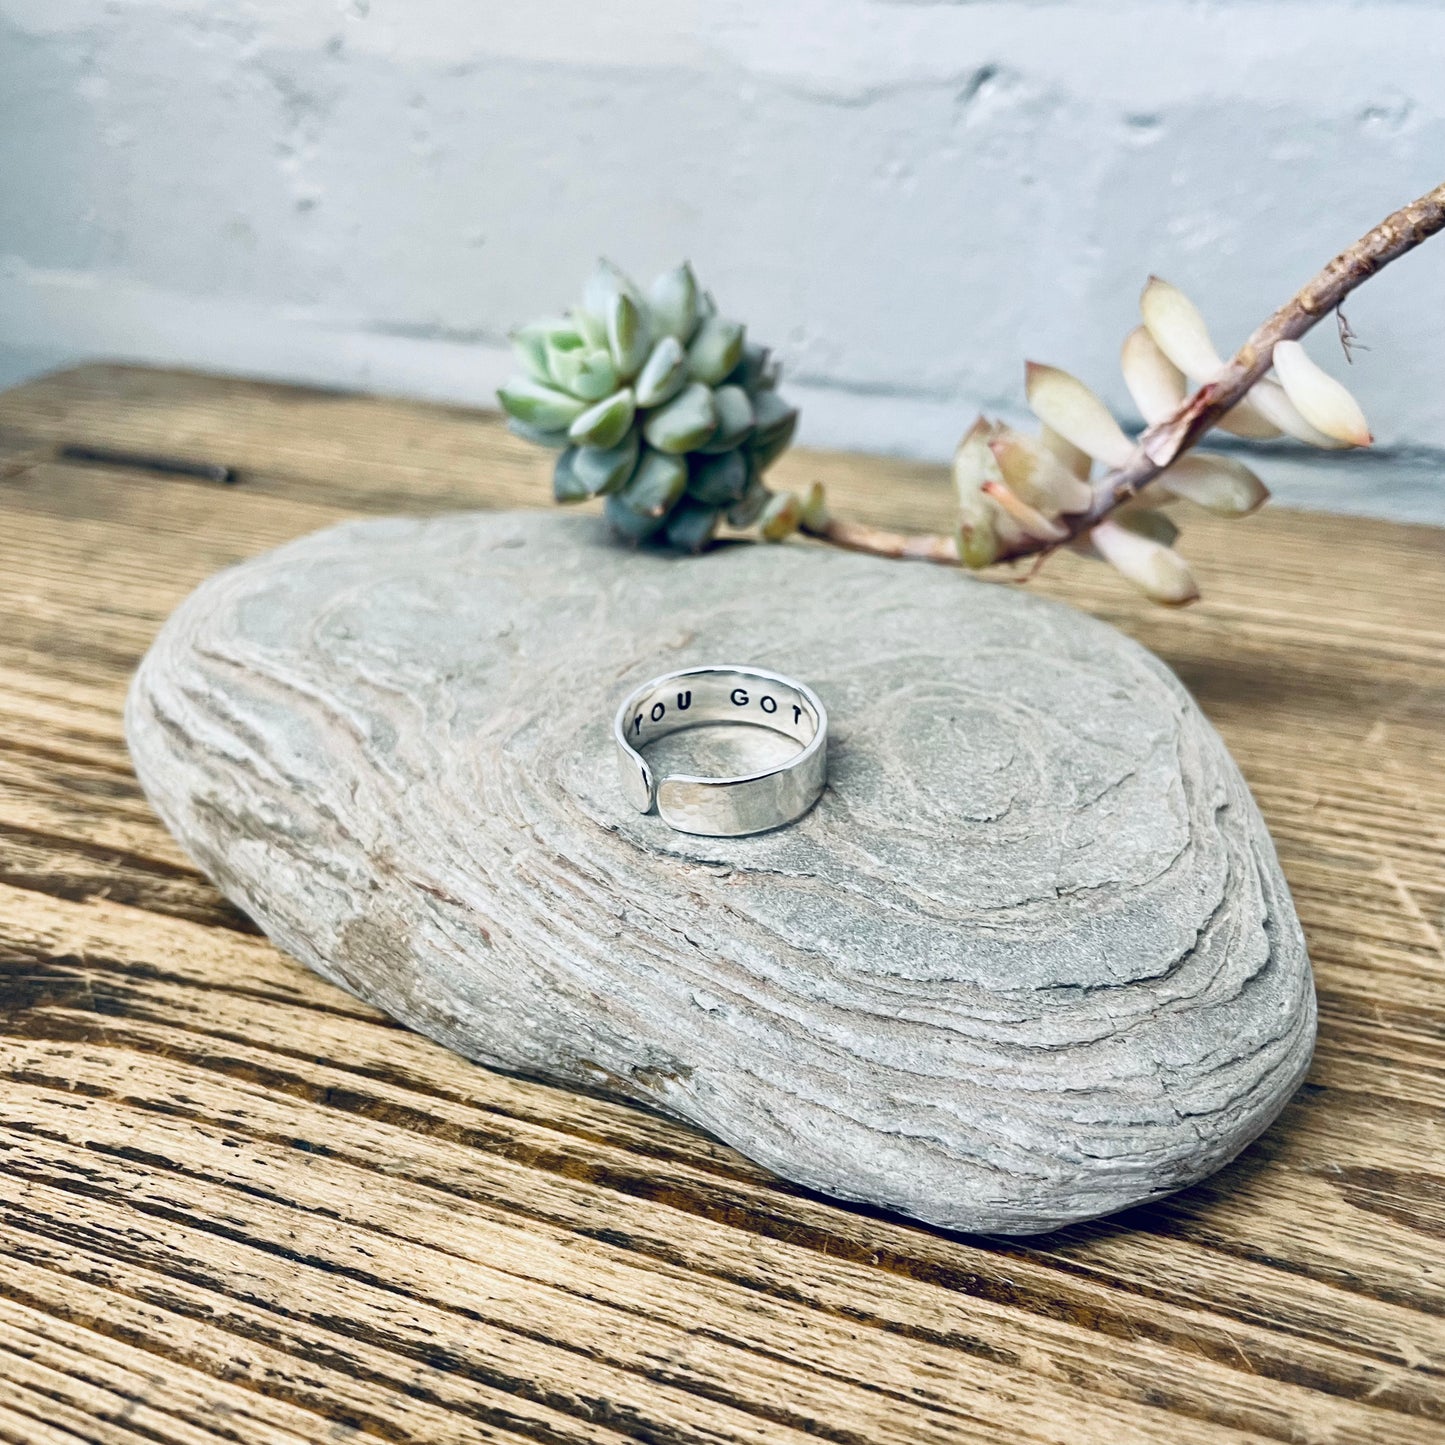 You Got This - Sterling Silver Affirmation Ring